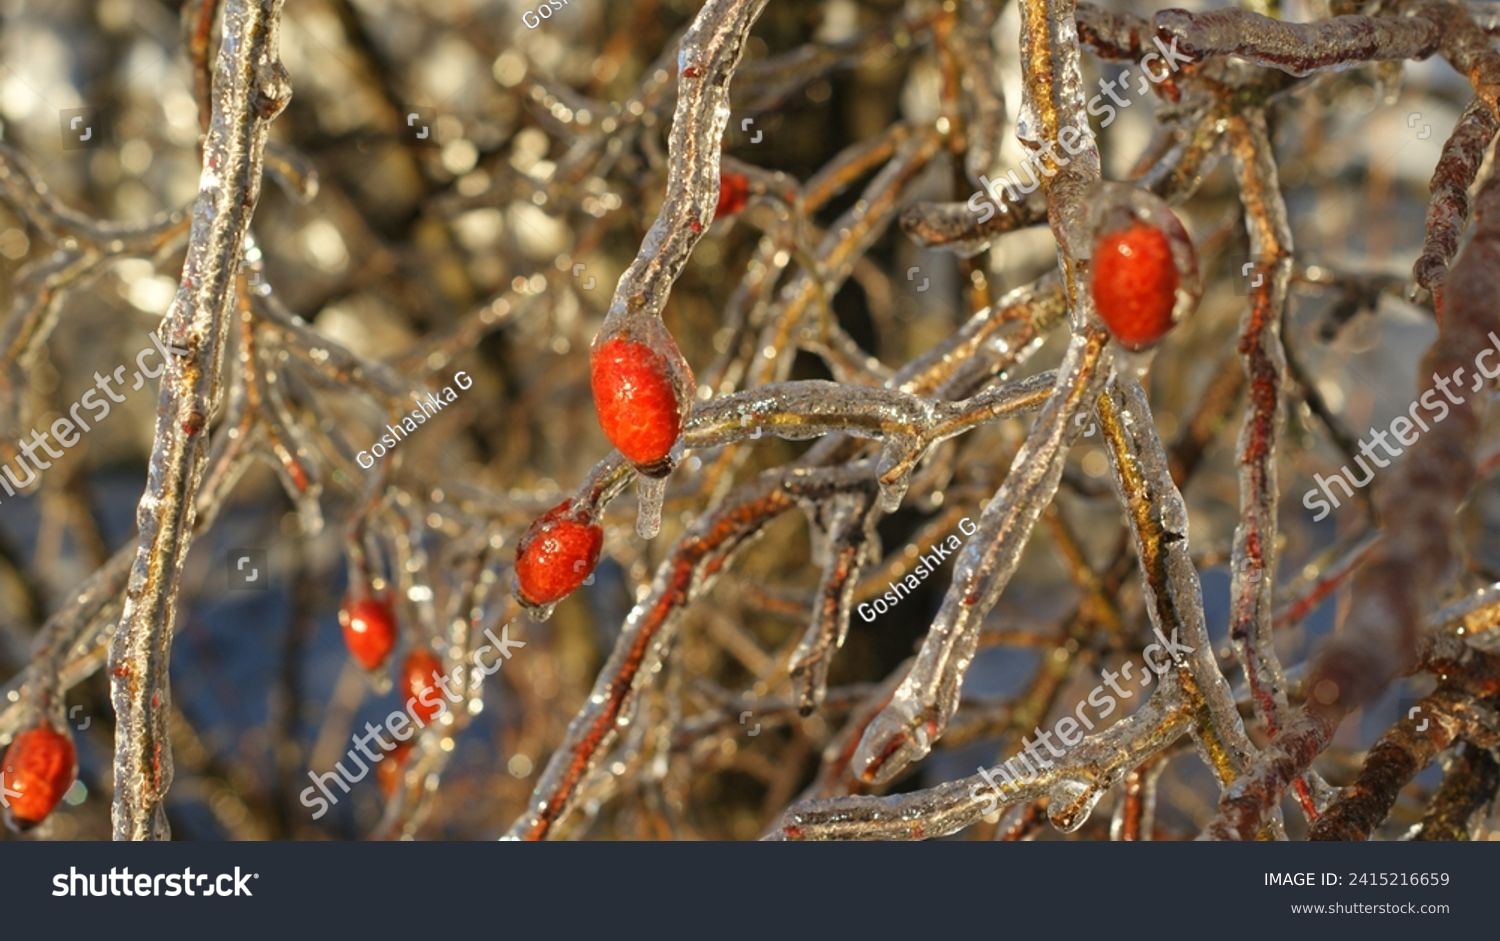 A close-up view of branches and red berries encased in ice, giving them a glossy appearance. The vibrant red berries are interspersed among the branches #2415216659